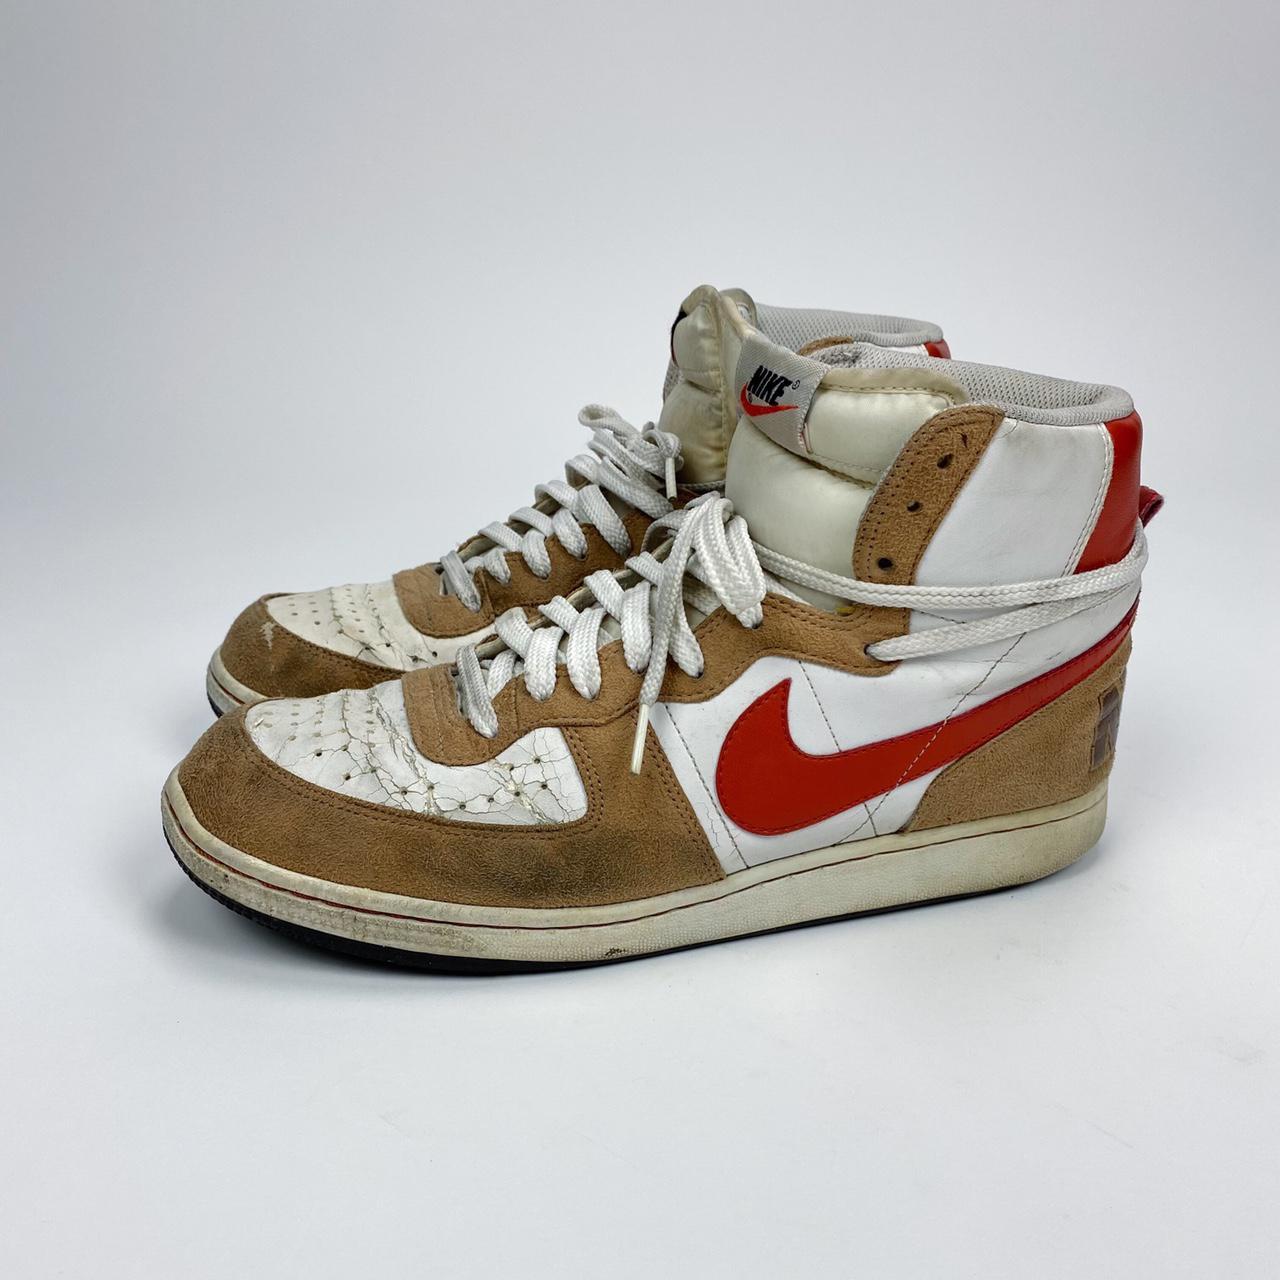 Nike Men's Tan and Red Trainers